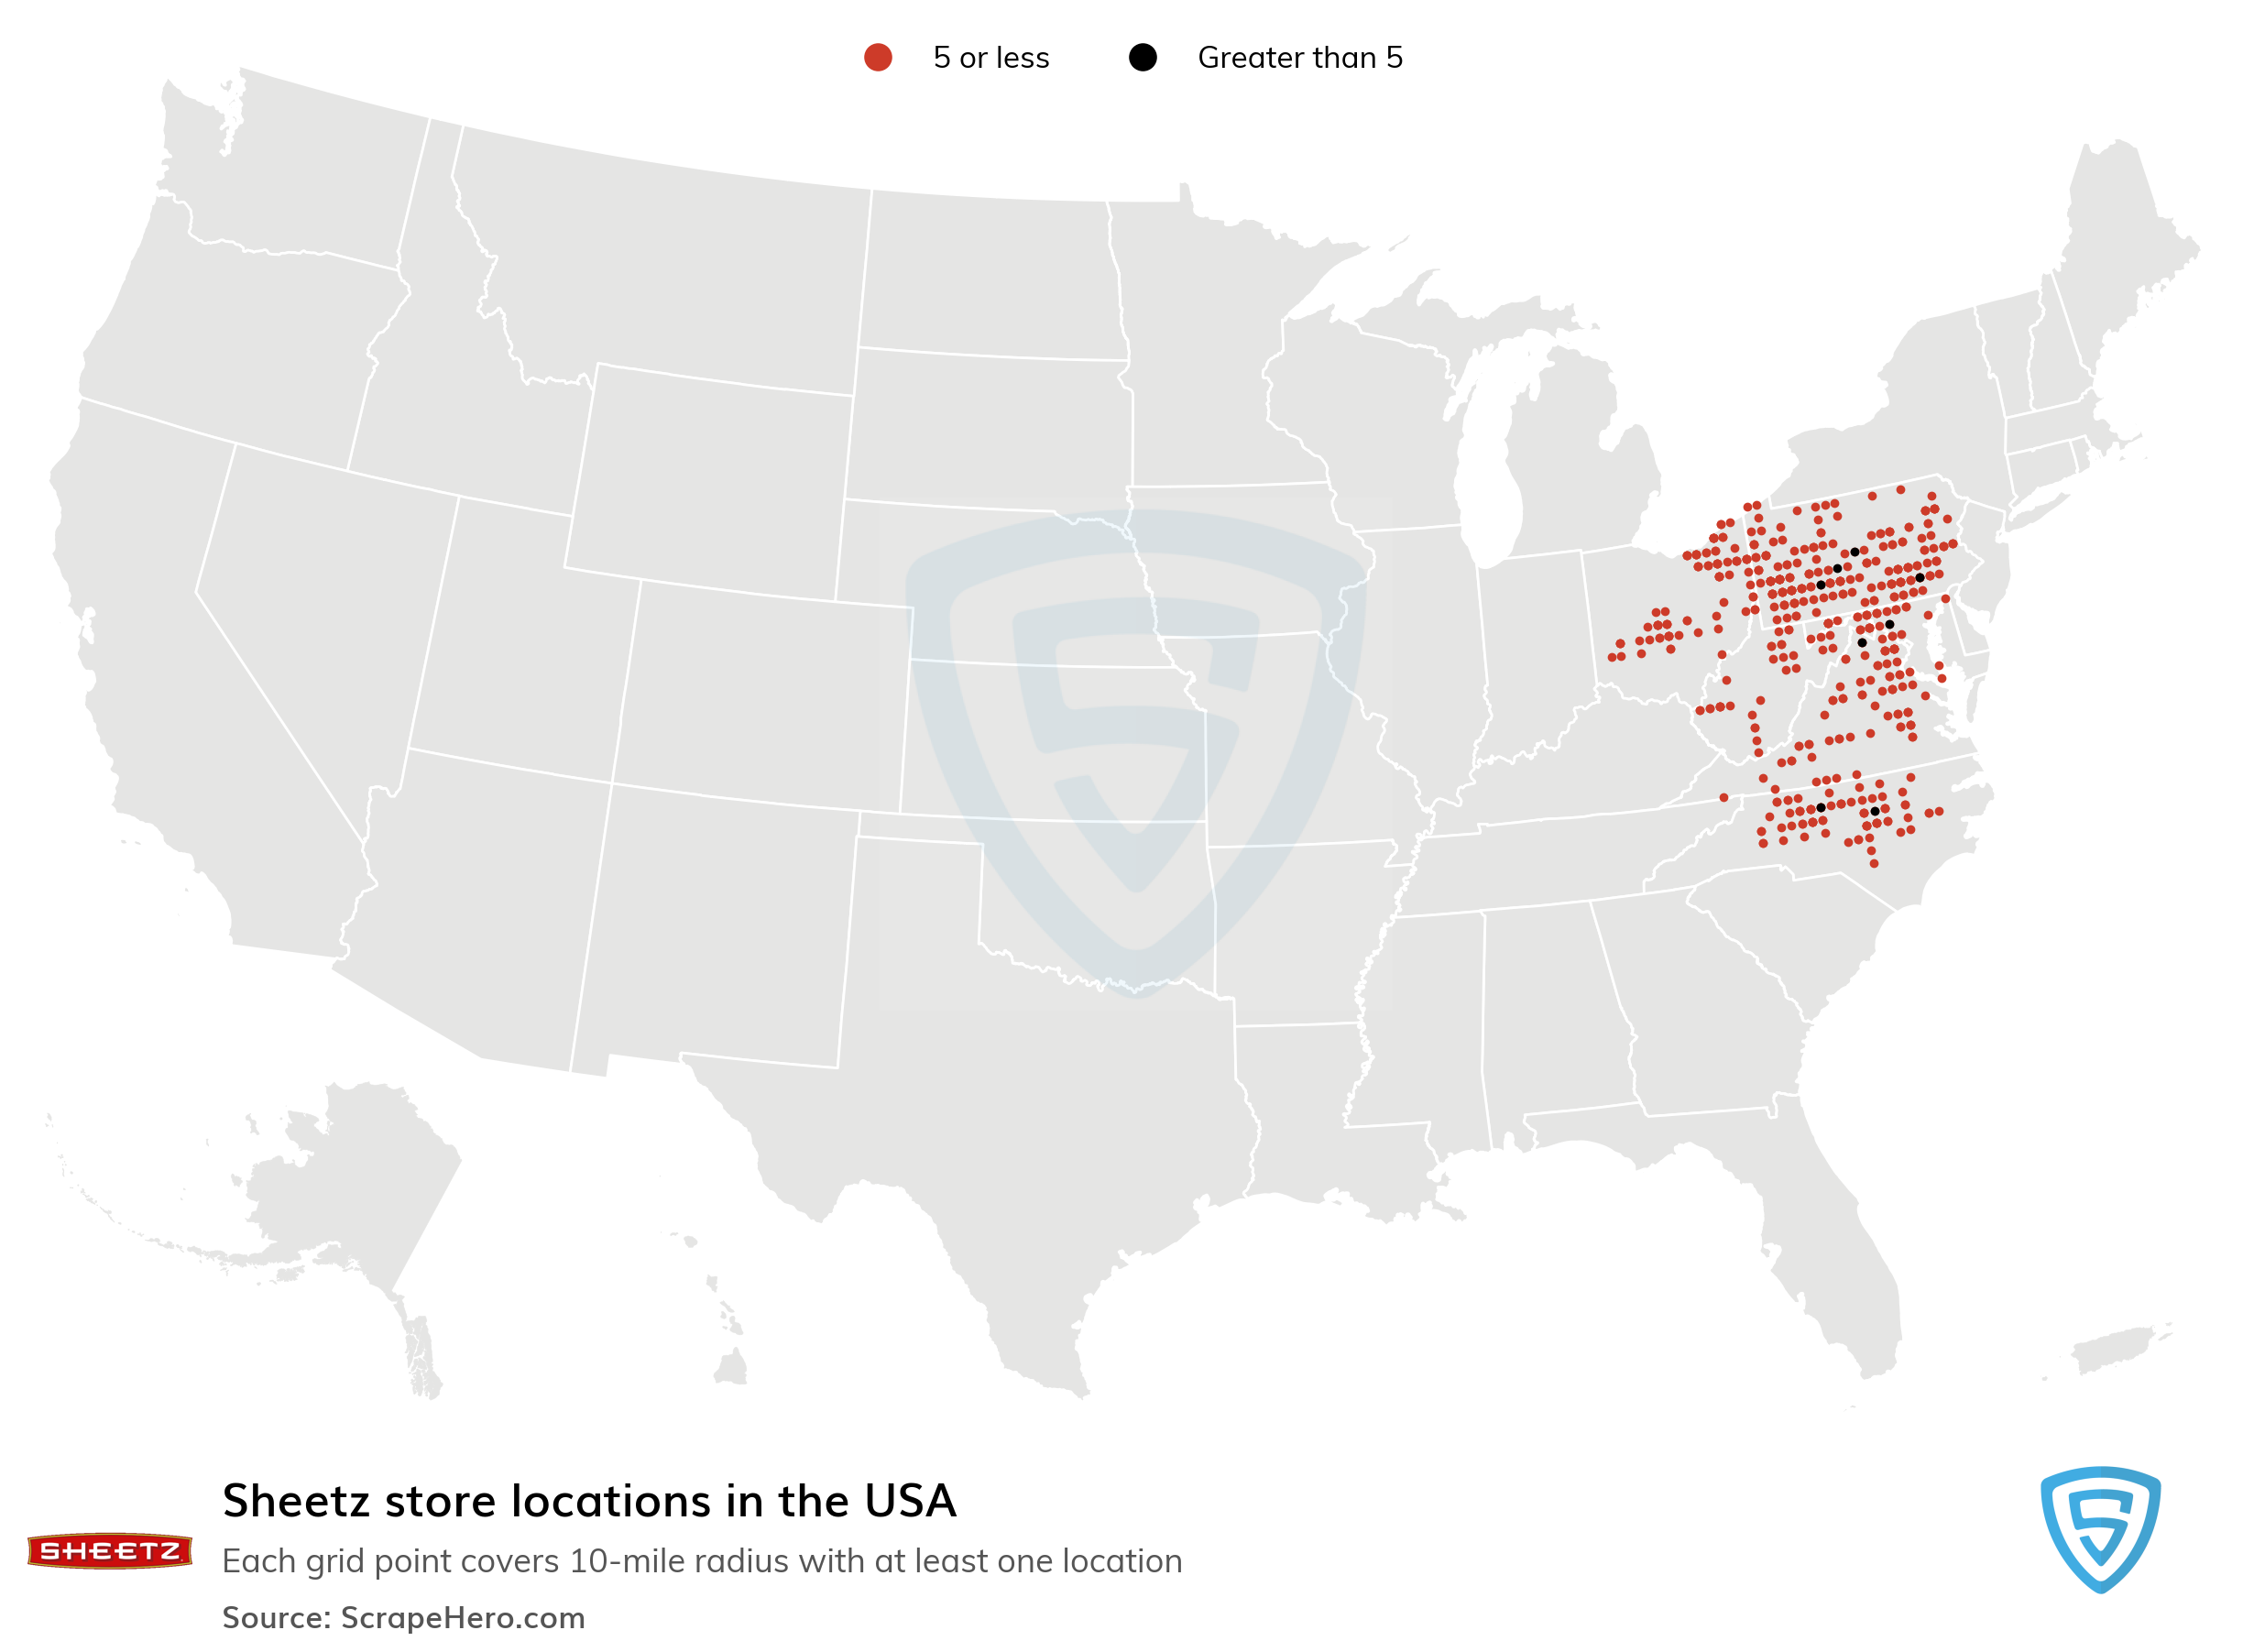 Number of Sheetz locations in the United States in 2022 | ScrapeHero